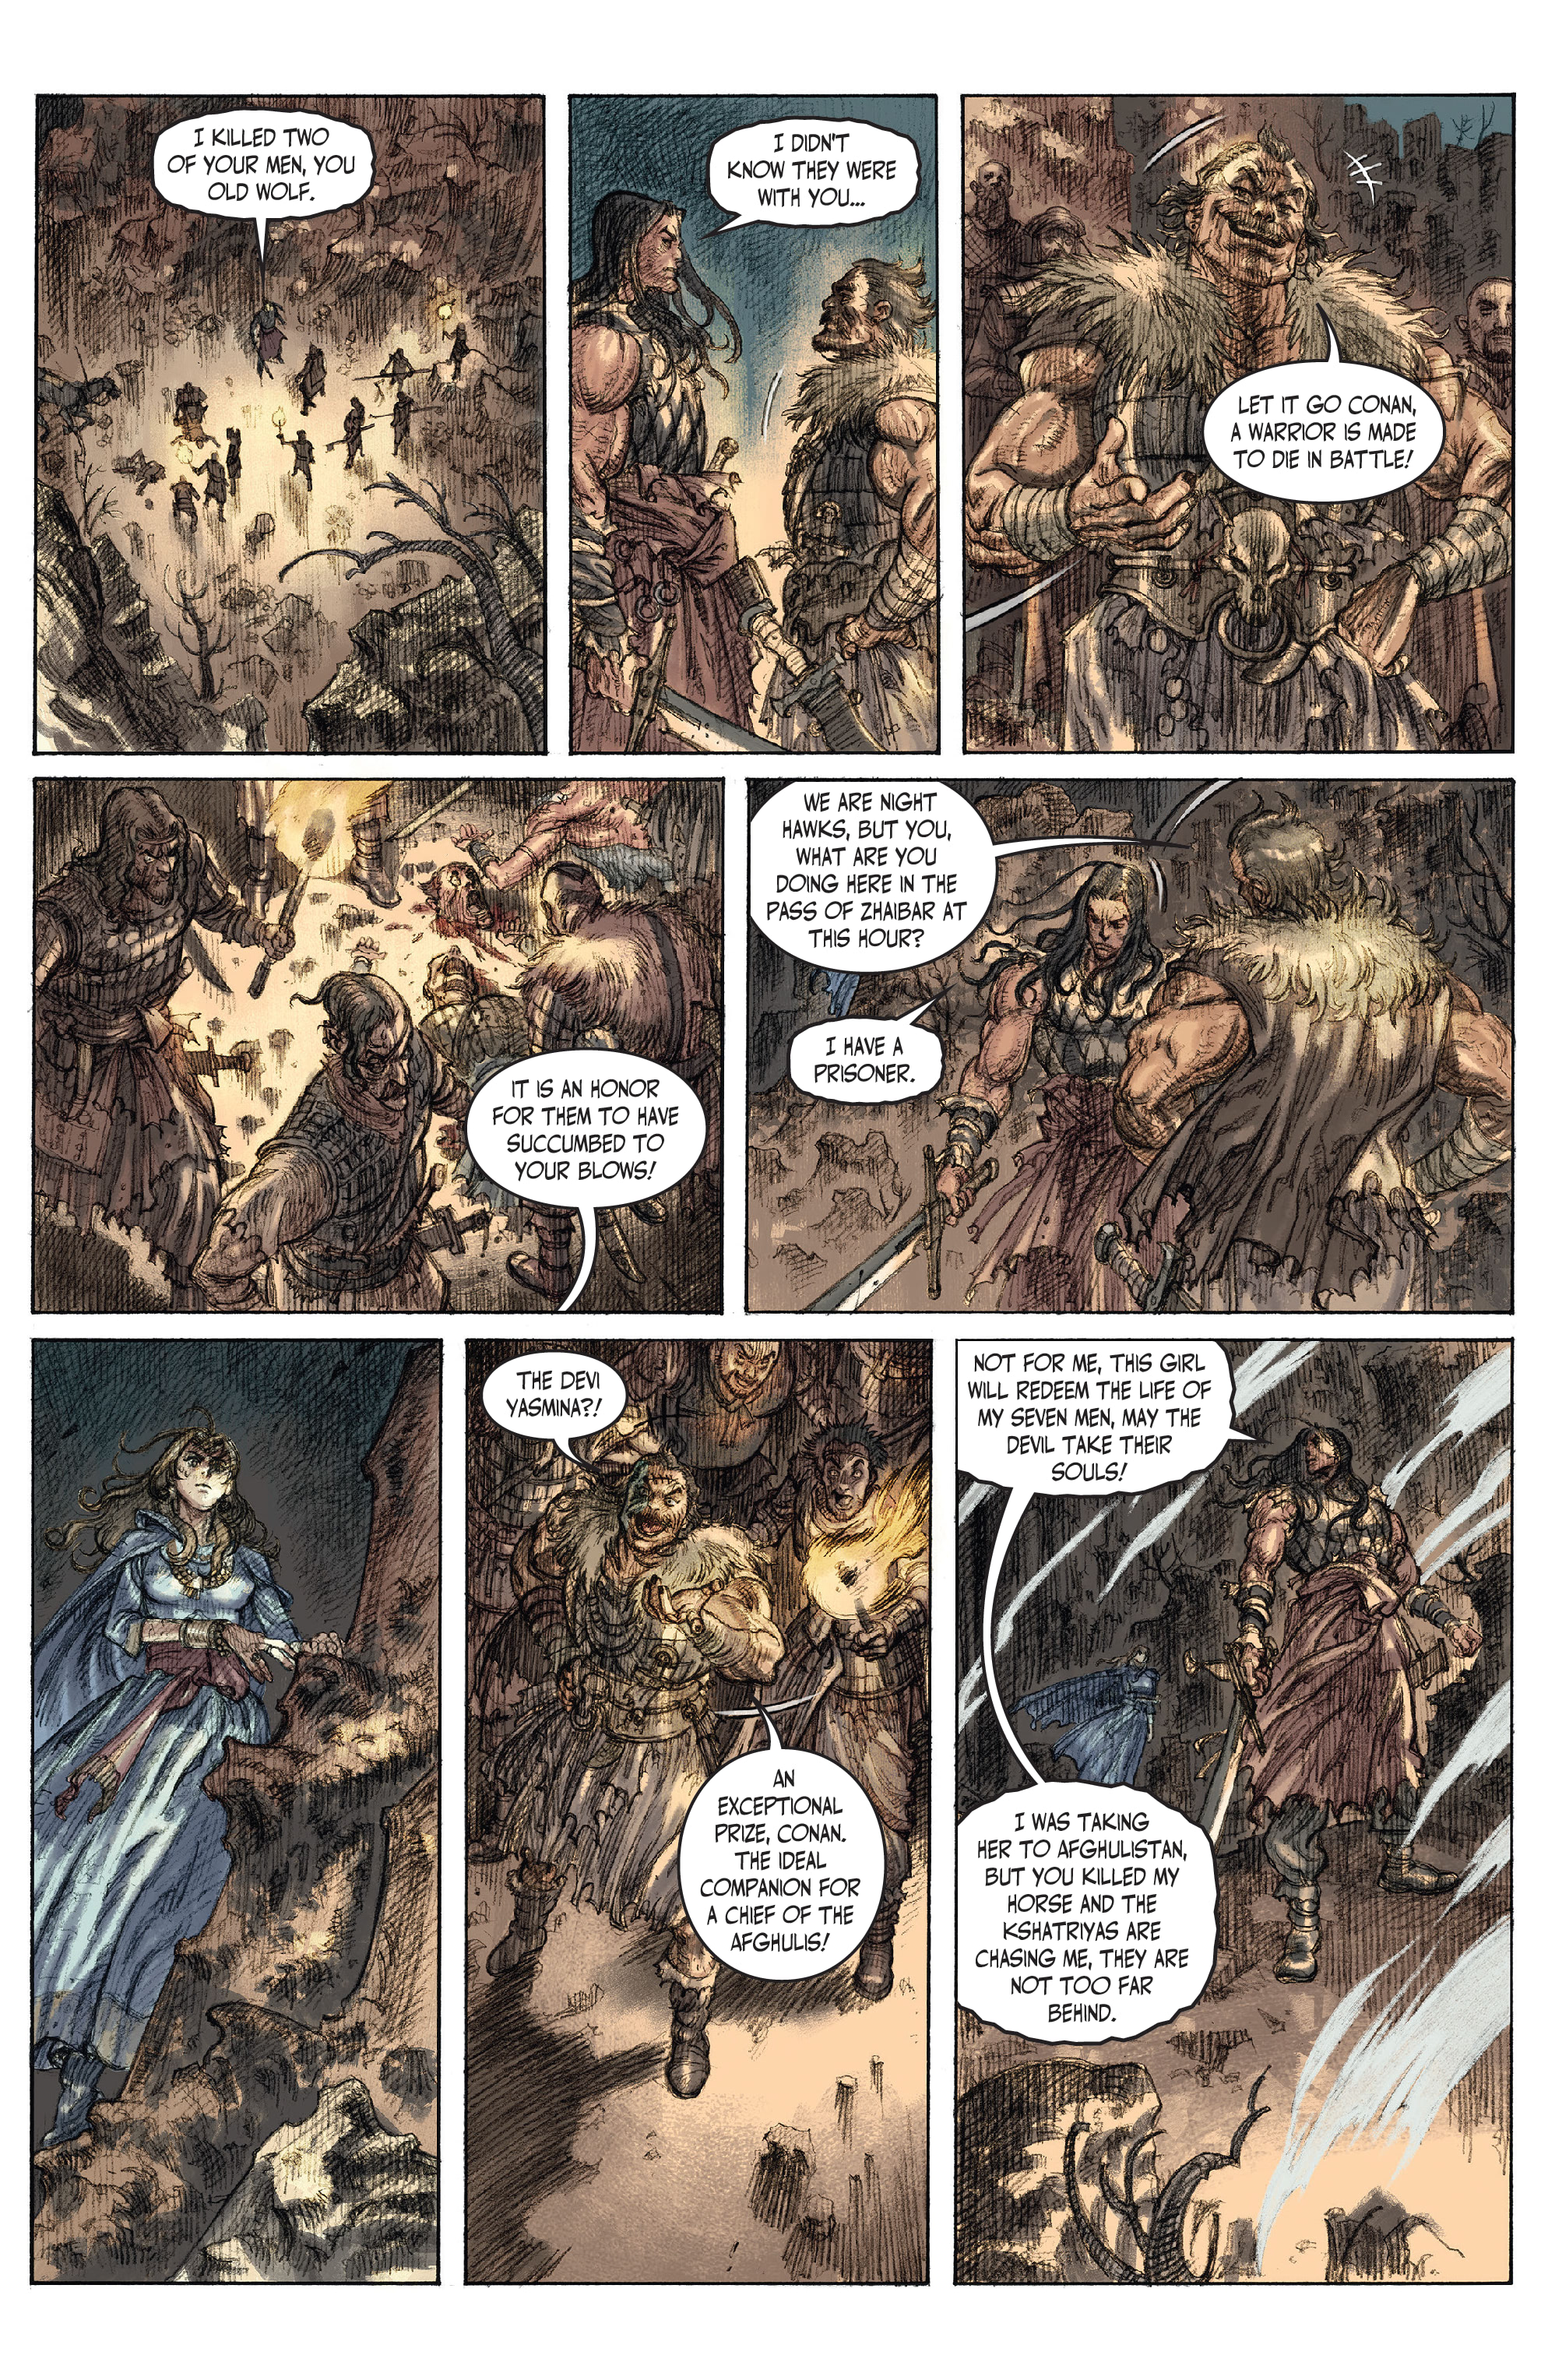 The Cimmerian: People of the Black Circle (2020-): Chapter 2 - Page 3